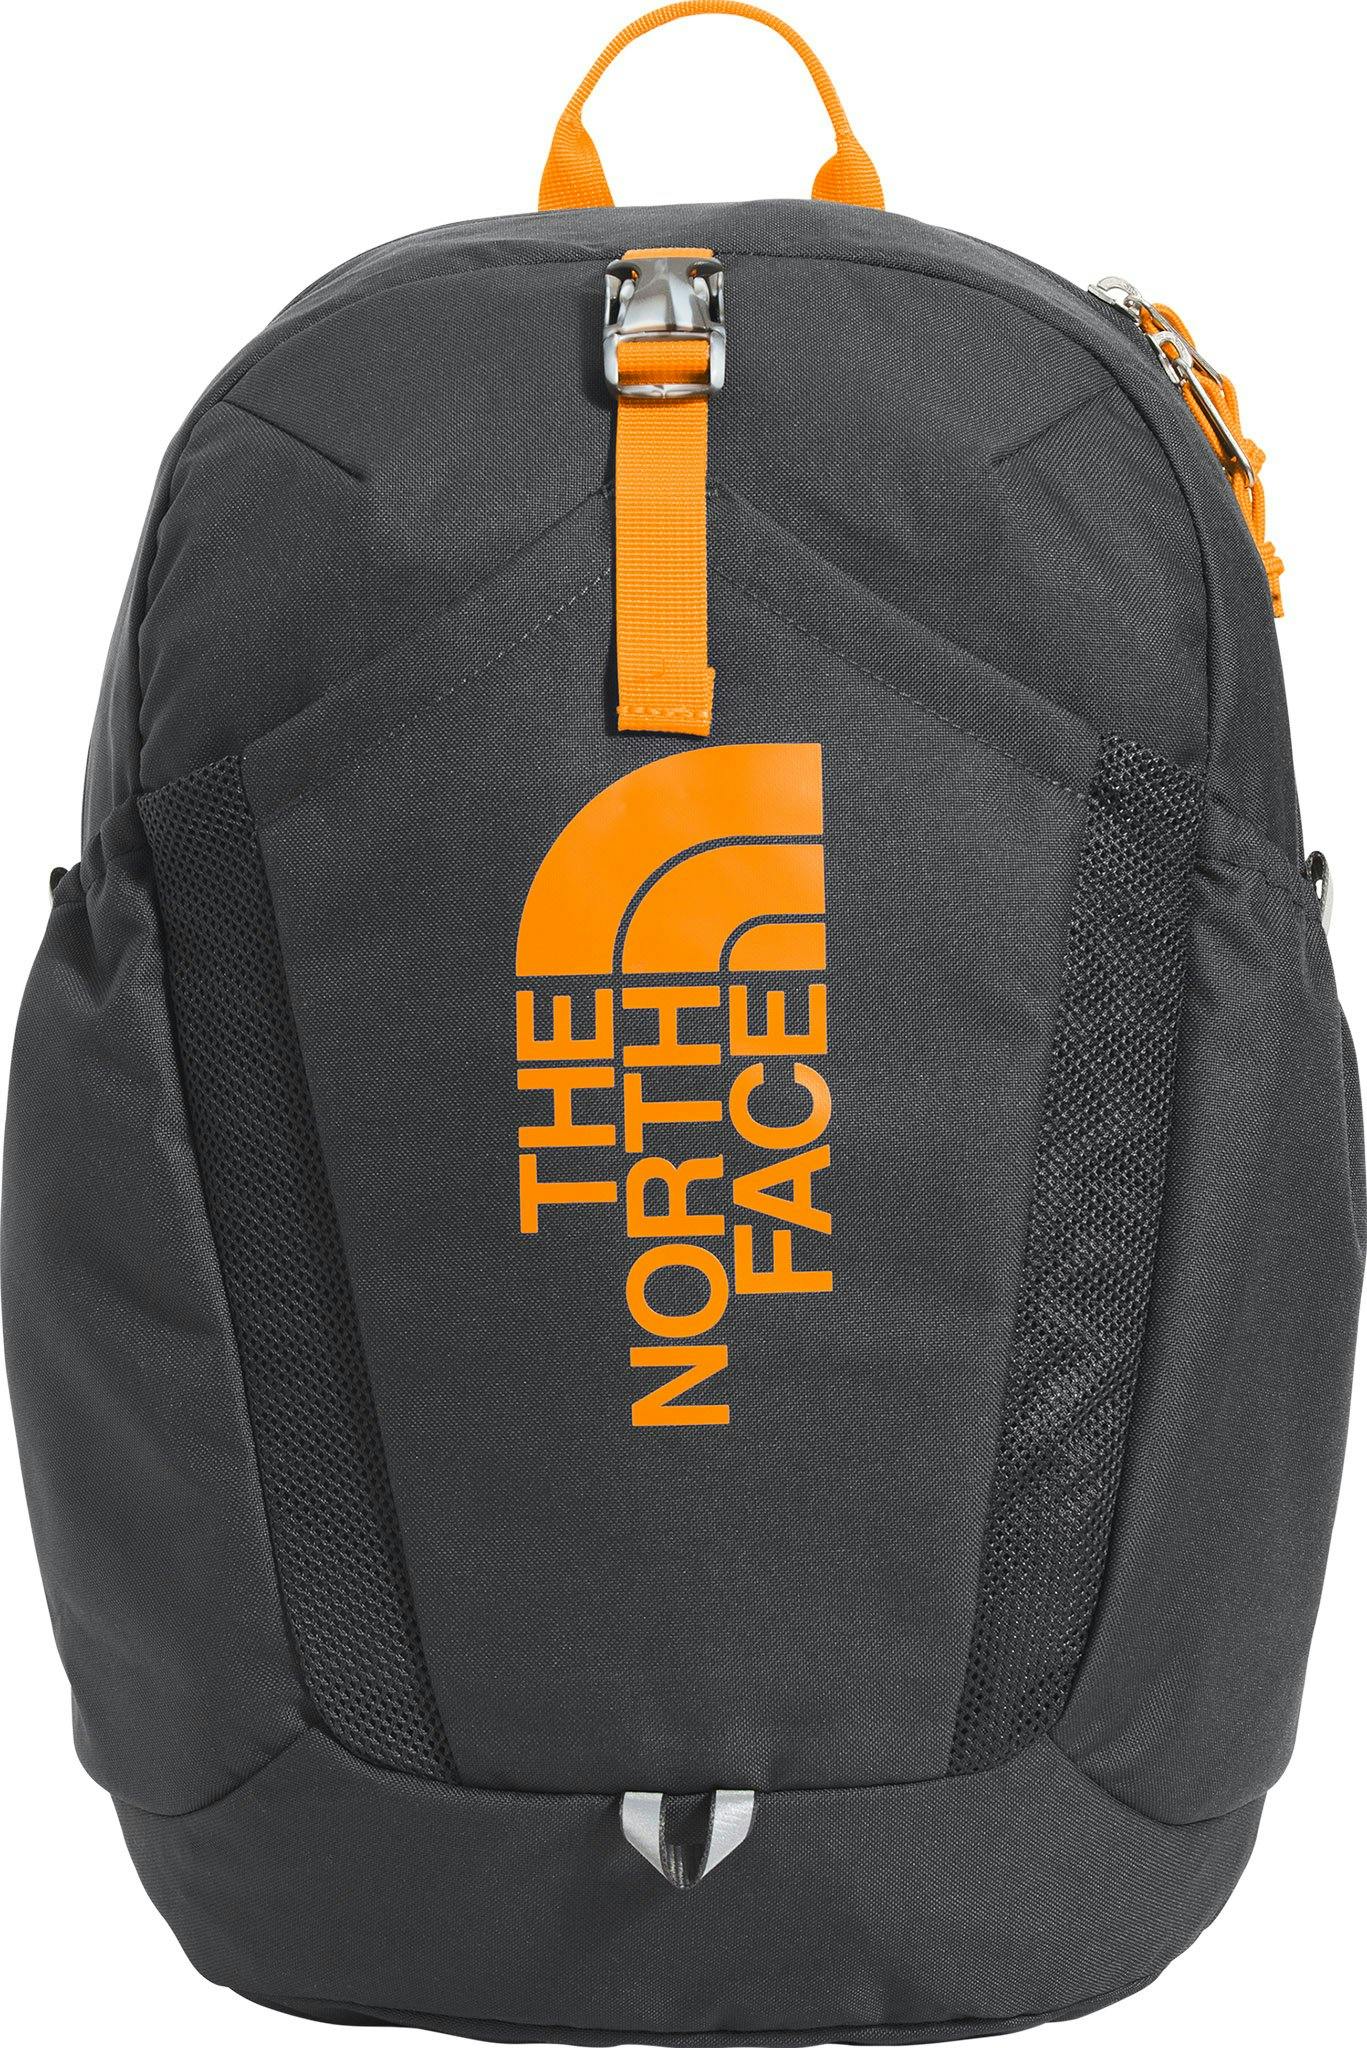 Product image for Mini Recon Backpack 19L - Kids